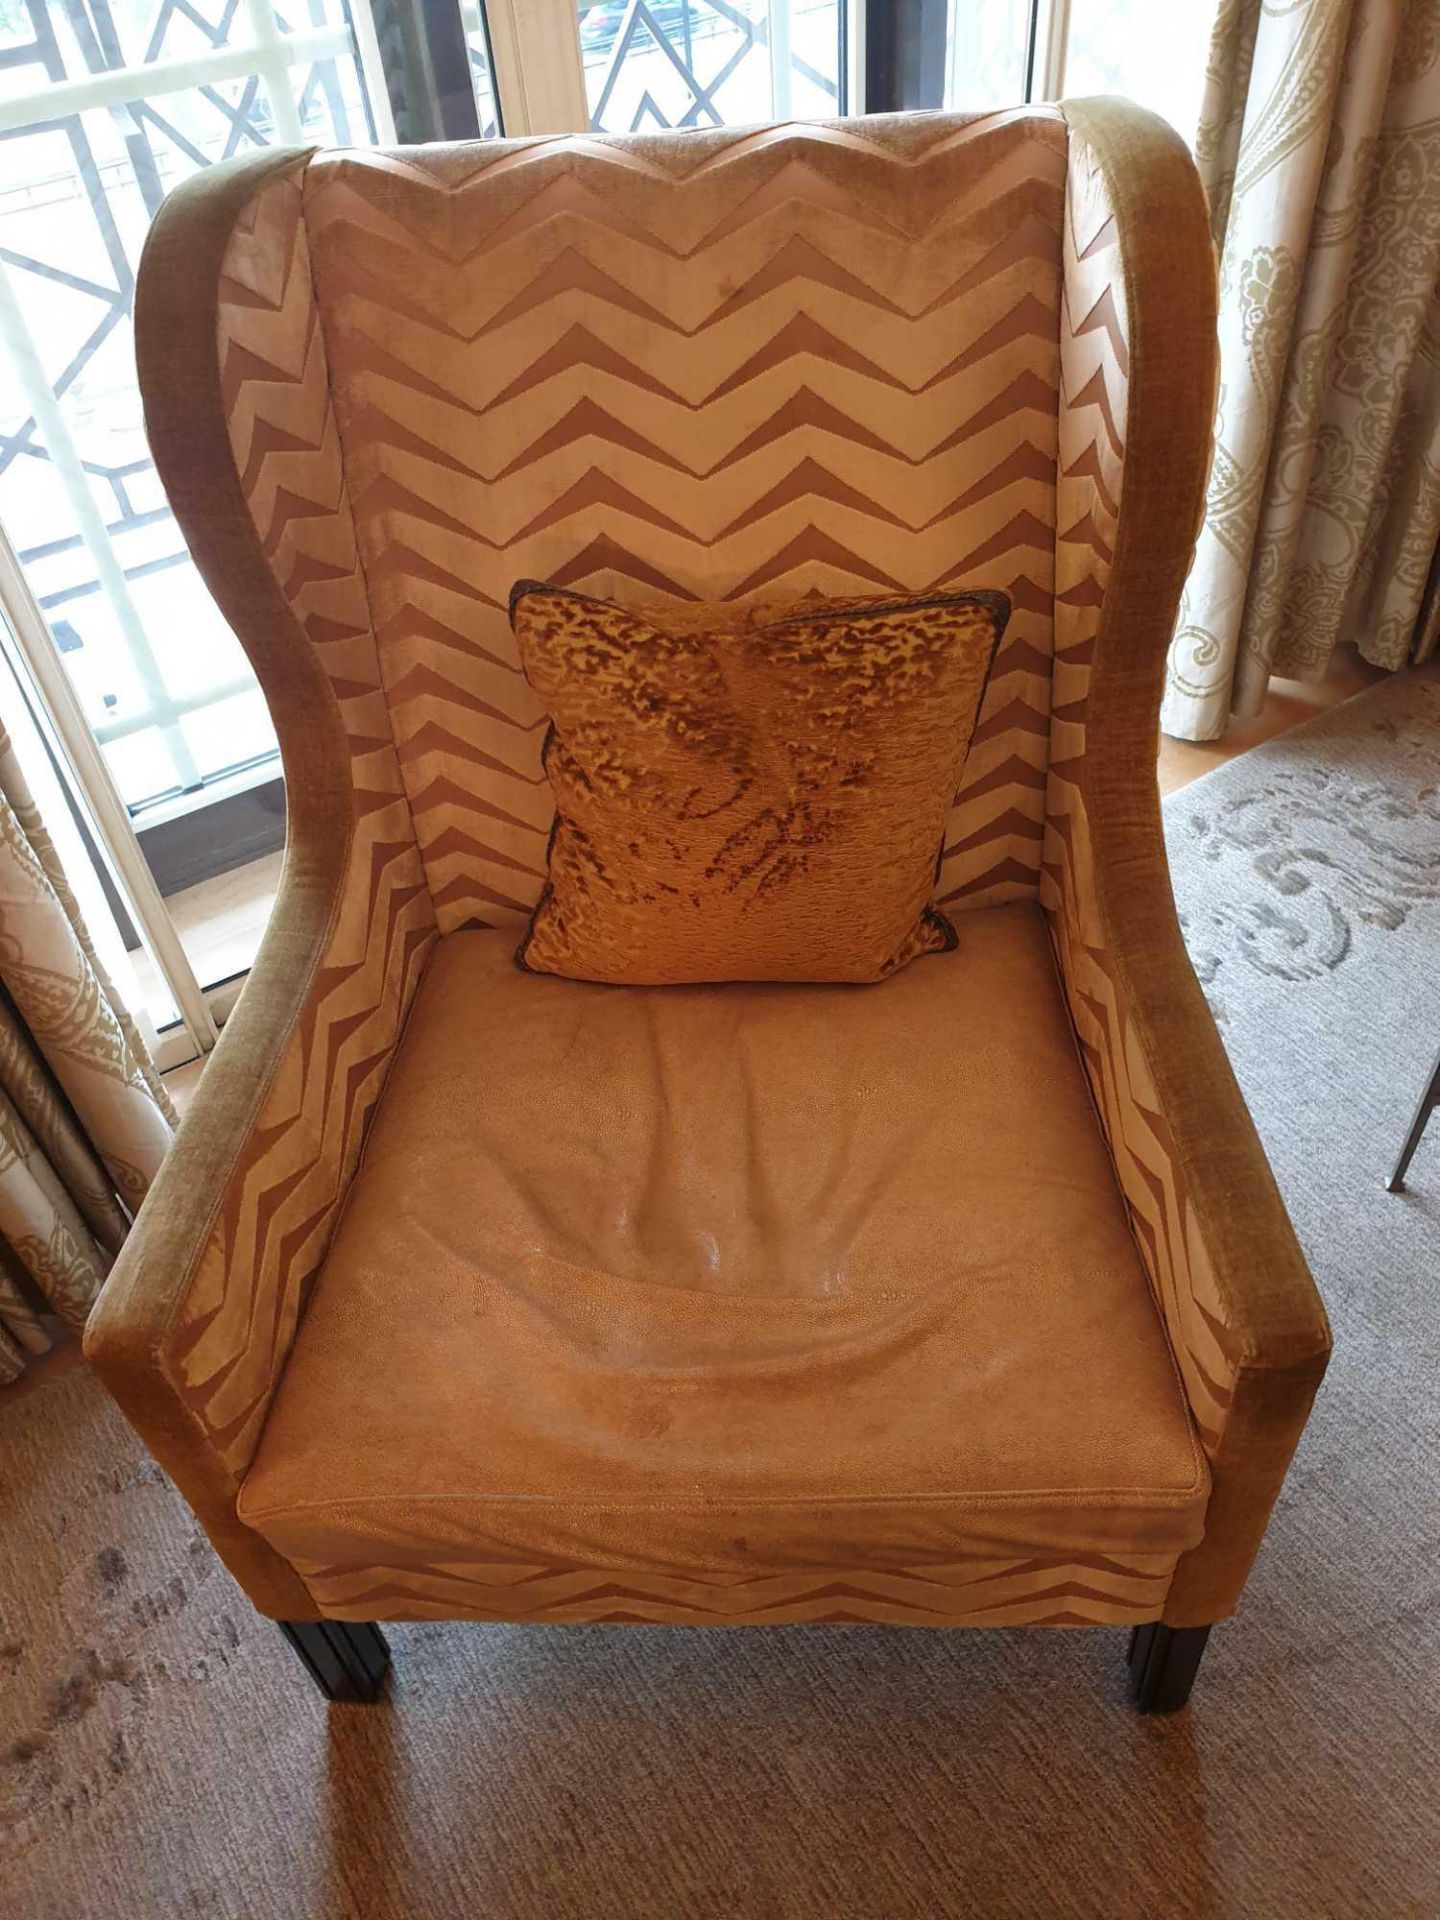 A Wingback Chair With Gold Chevron Fabric 78 x 62 x 106cm (Room 310 & 311) - Image 2 of 4